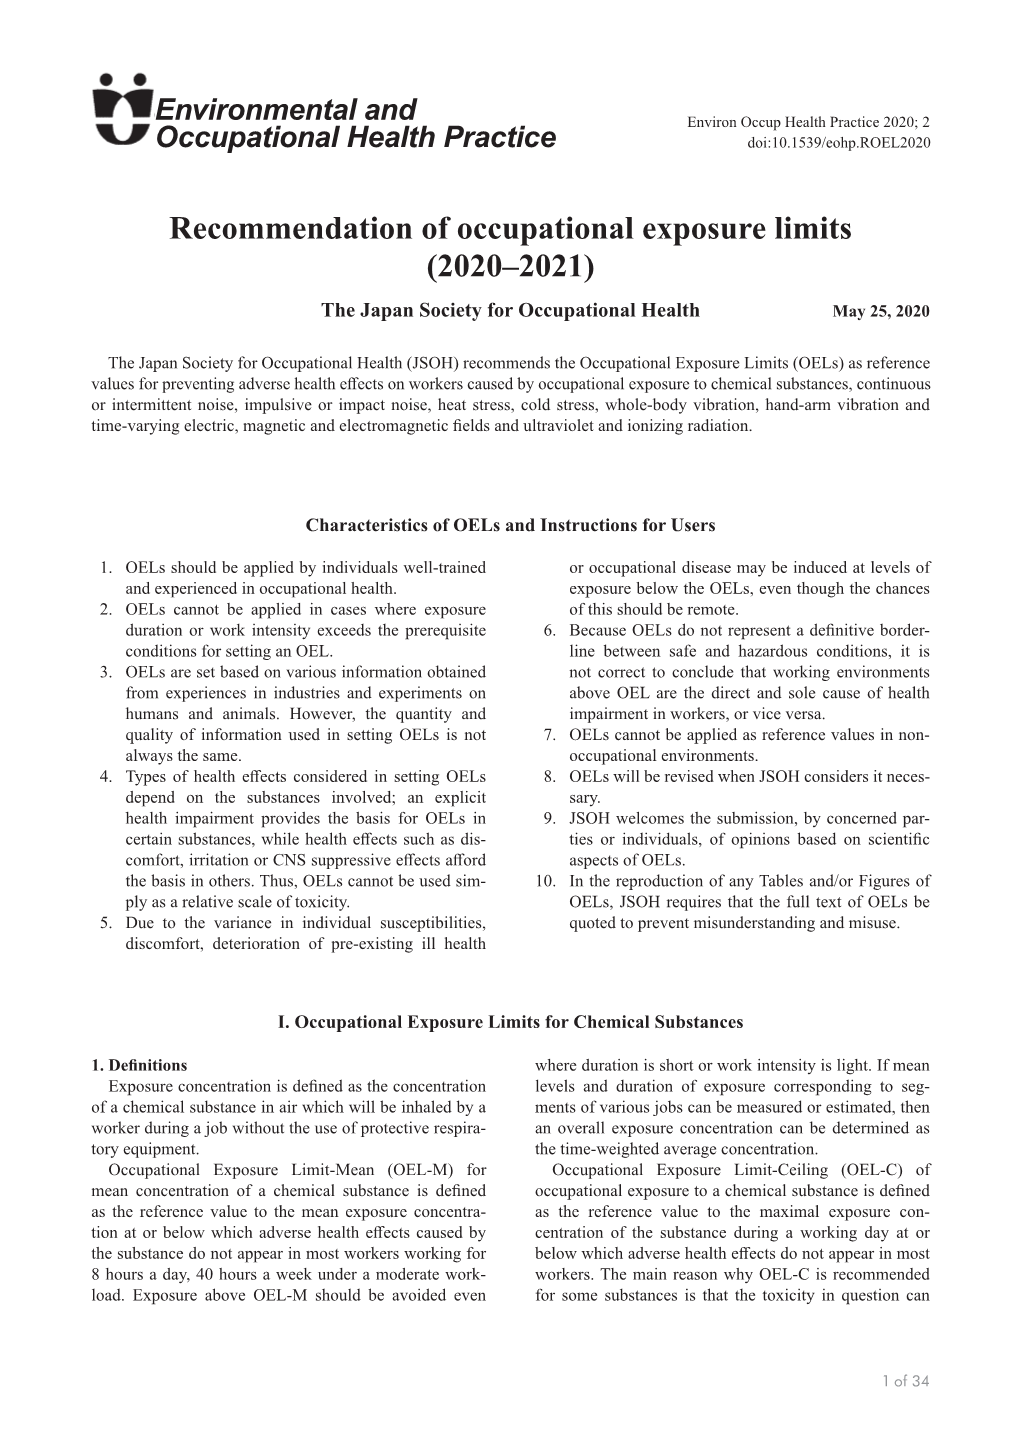 Recommendation of Occupational Exposure Limits (2020–2021) the Japan Society for Occupational Health May 25, 2020